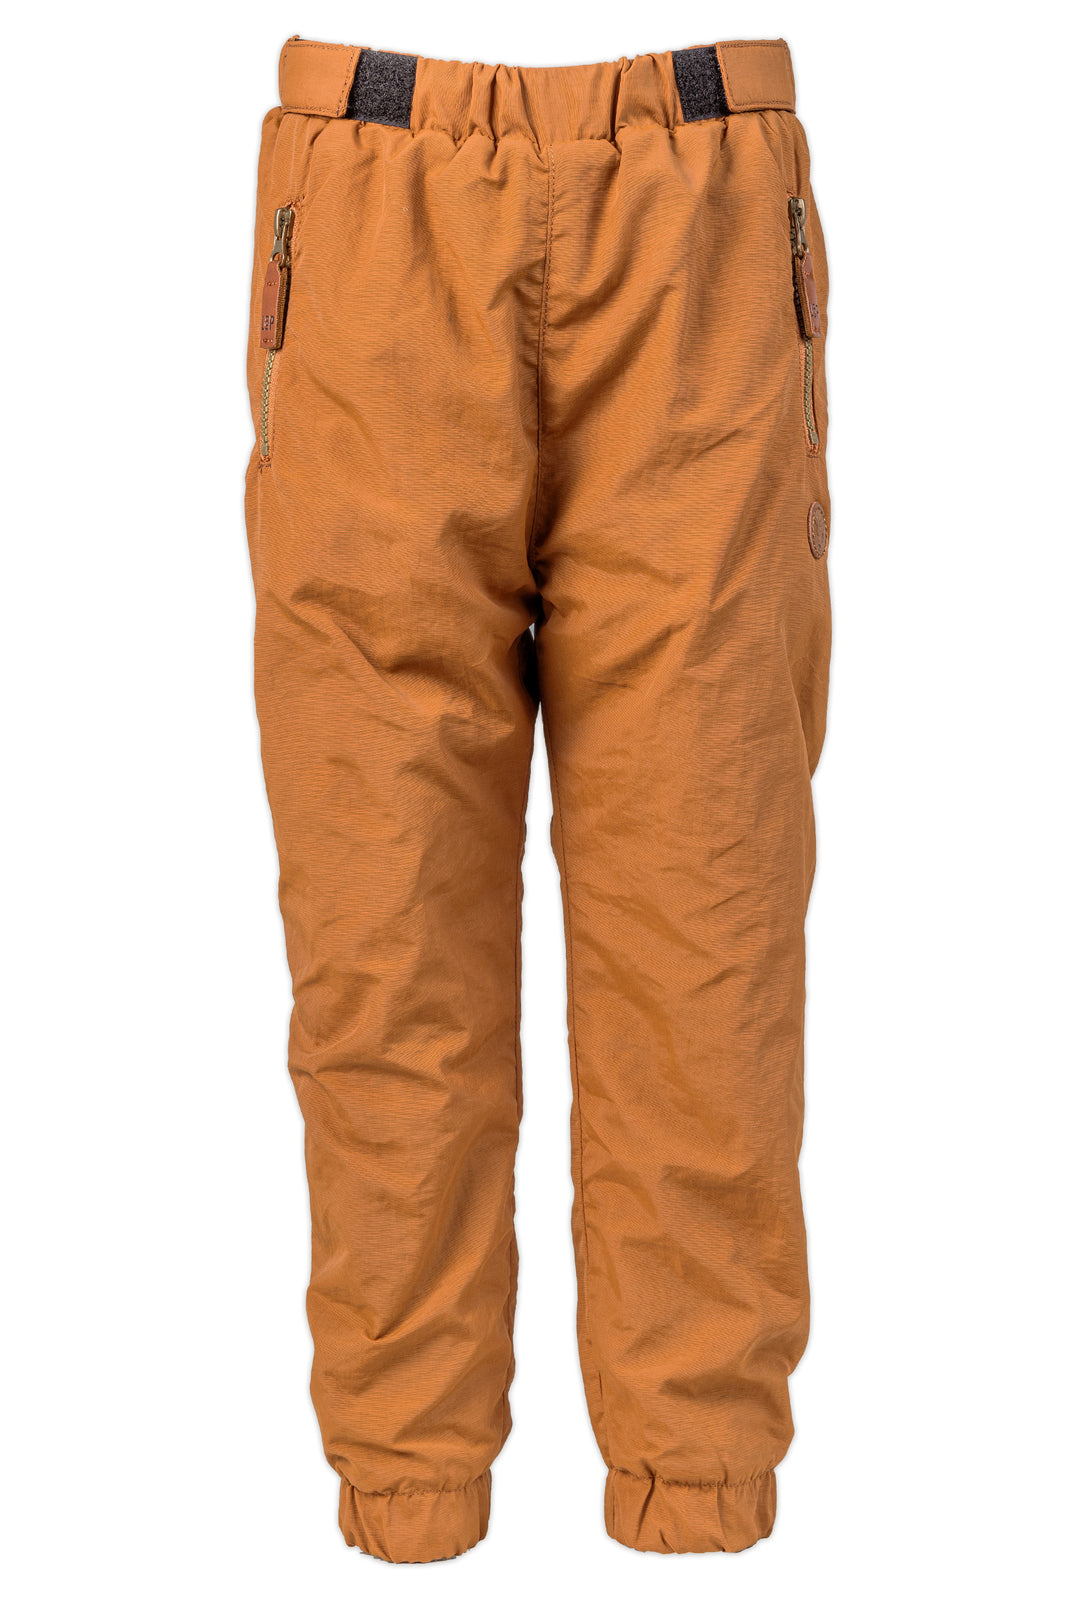 Cotton Lined Outdoor Pants [224] [Baby]